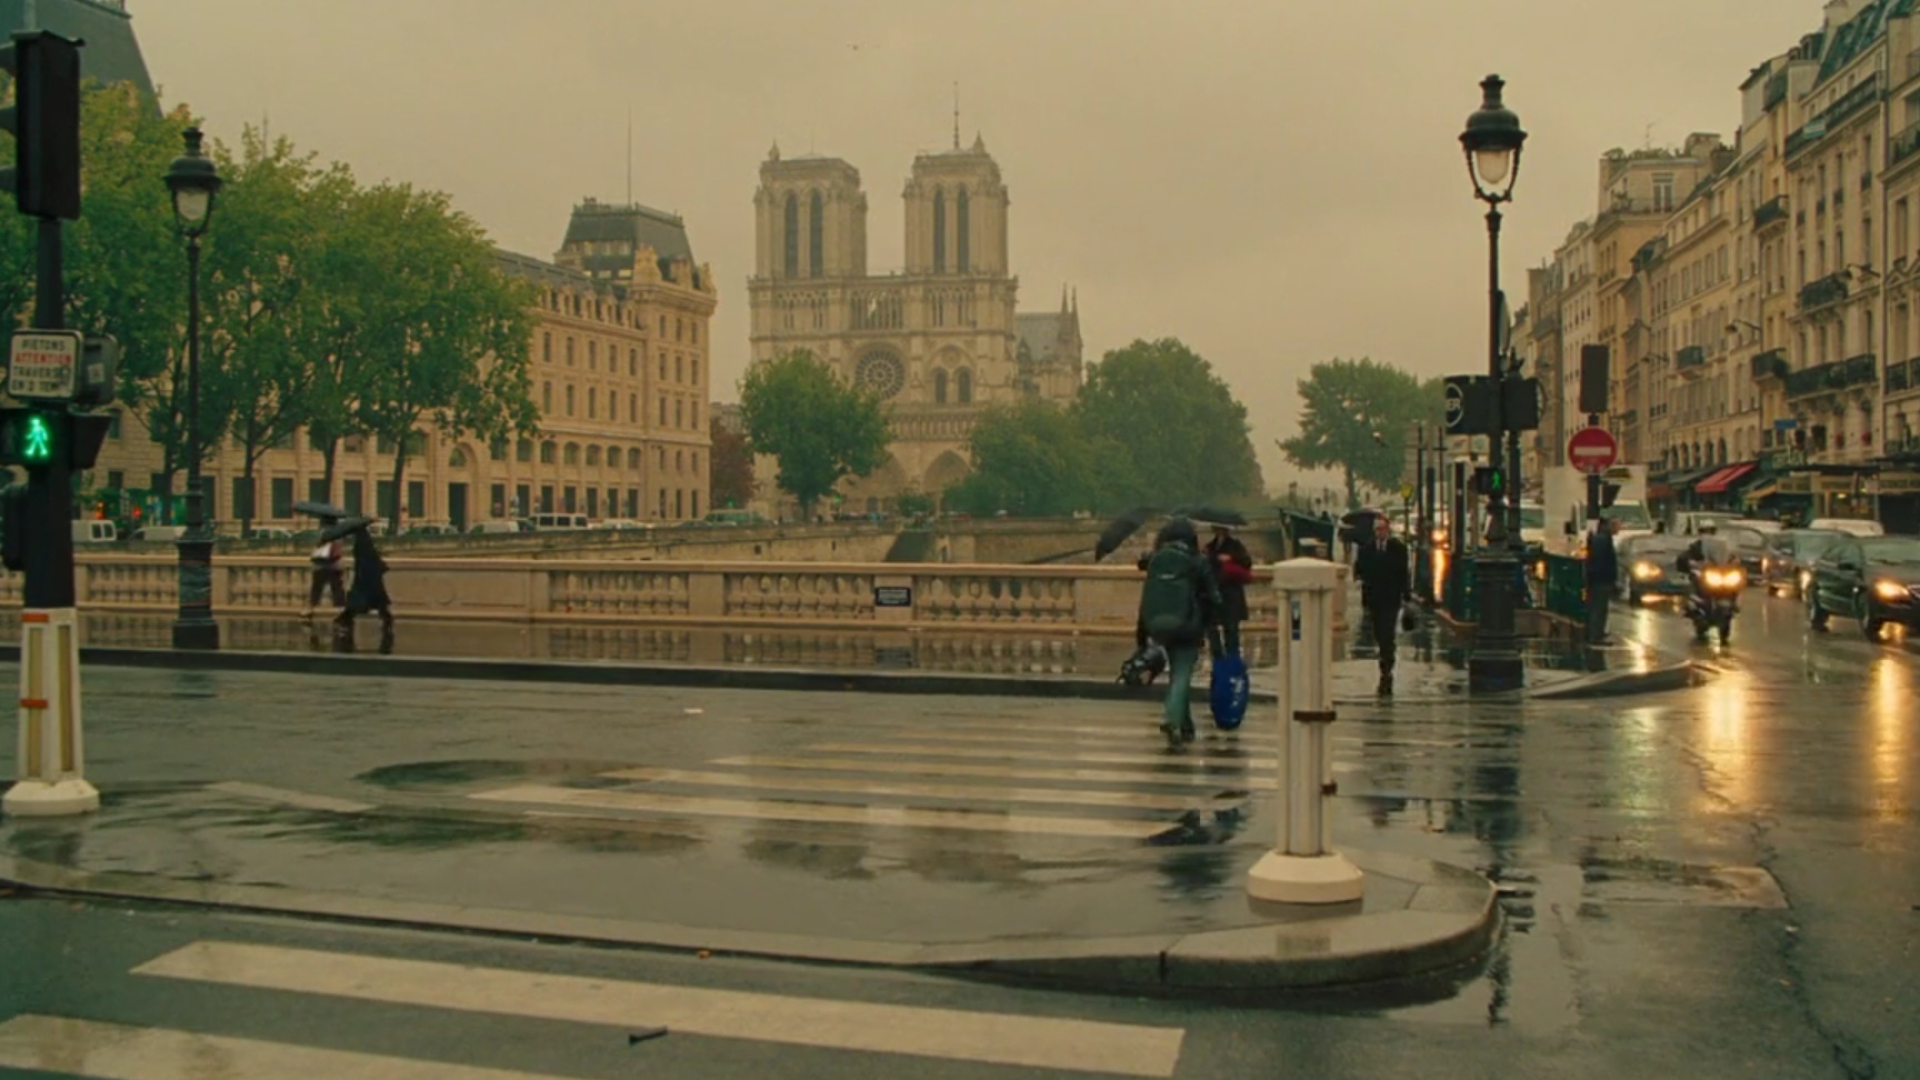 Midnight in Paris: The film won the Golden Globe Award for Best Screenplay in 2012. 1920x1080 Full HD Background.